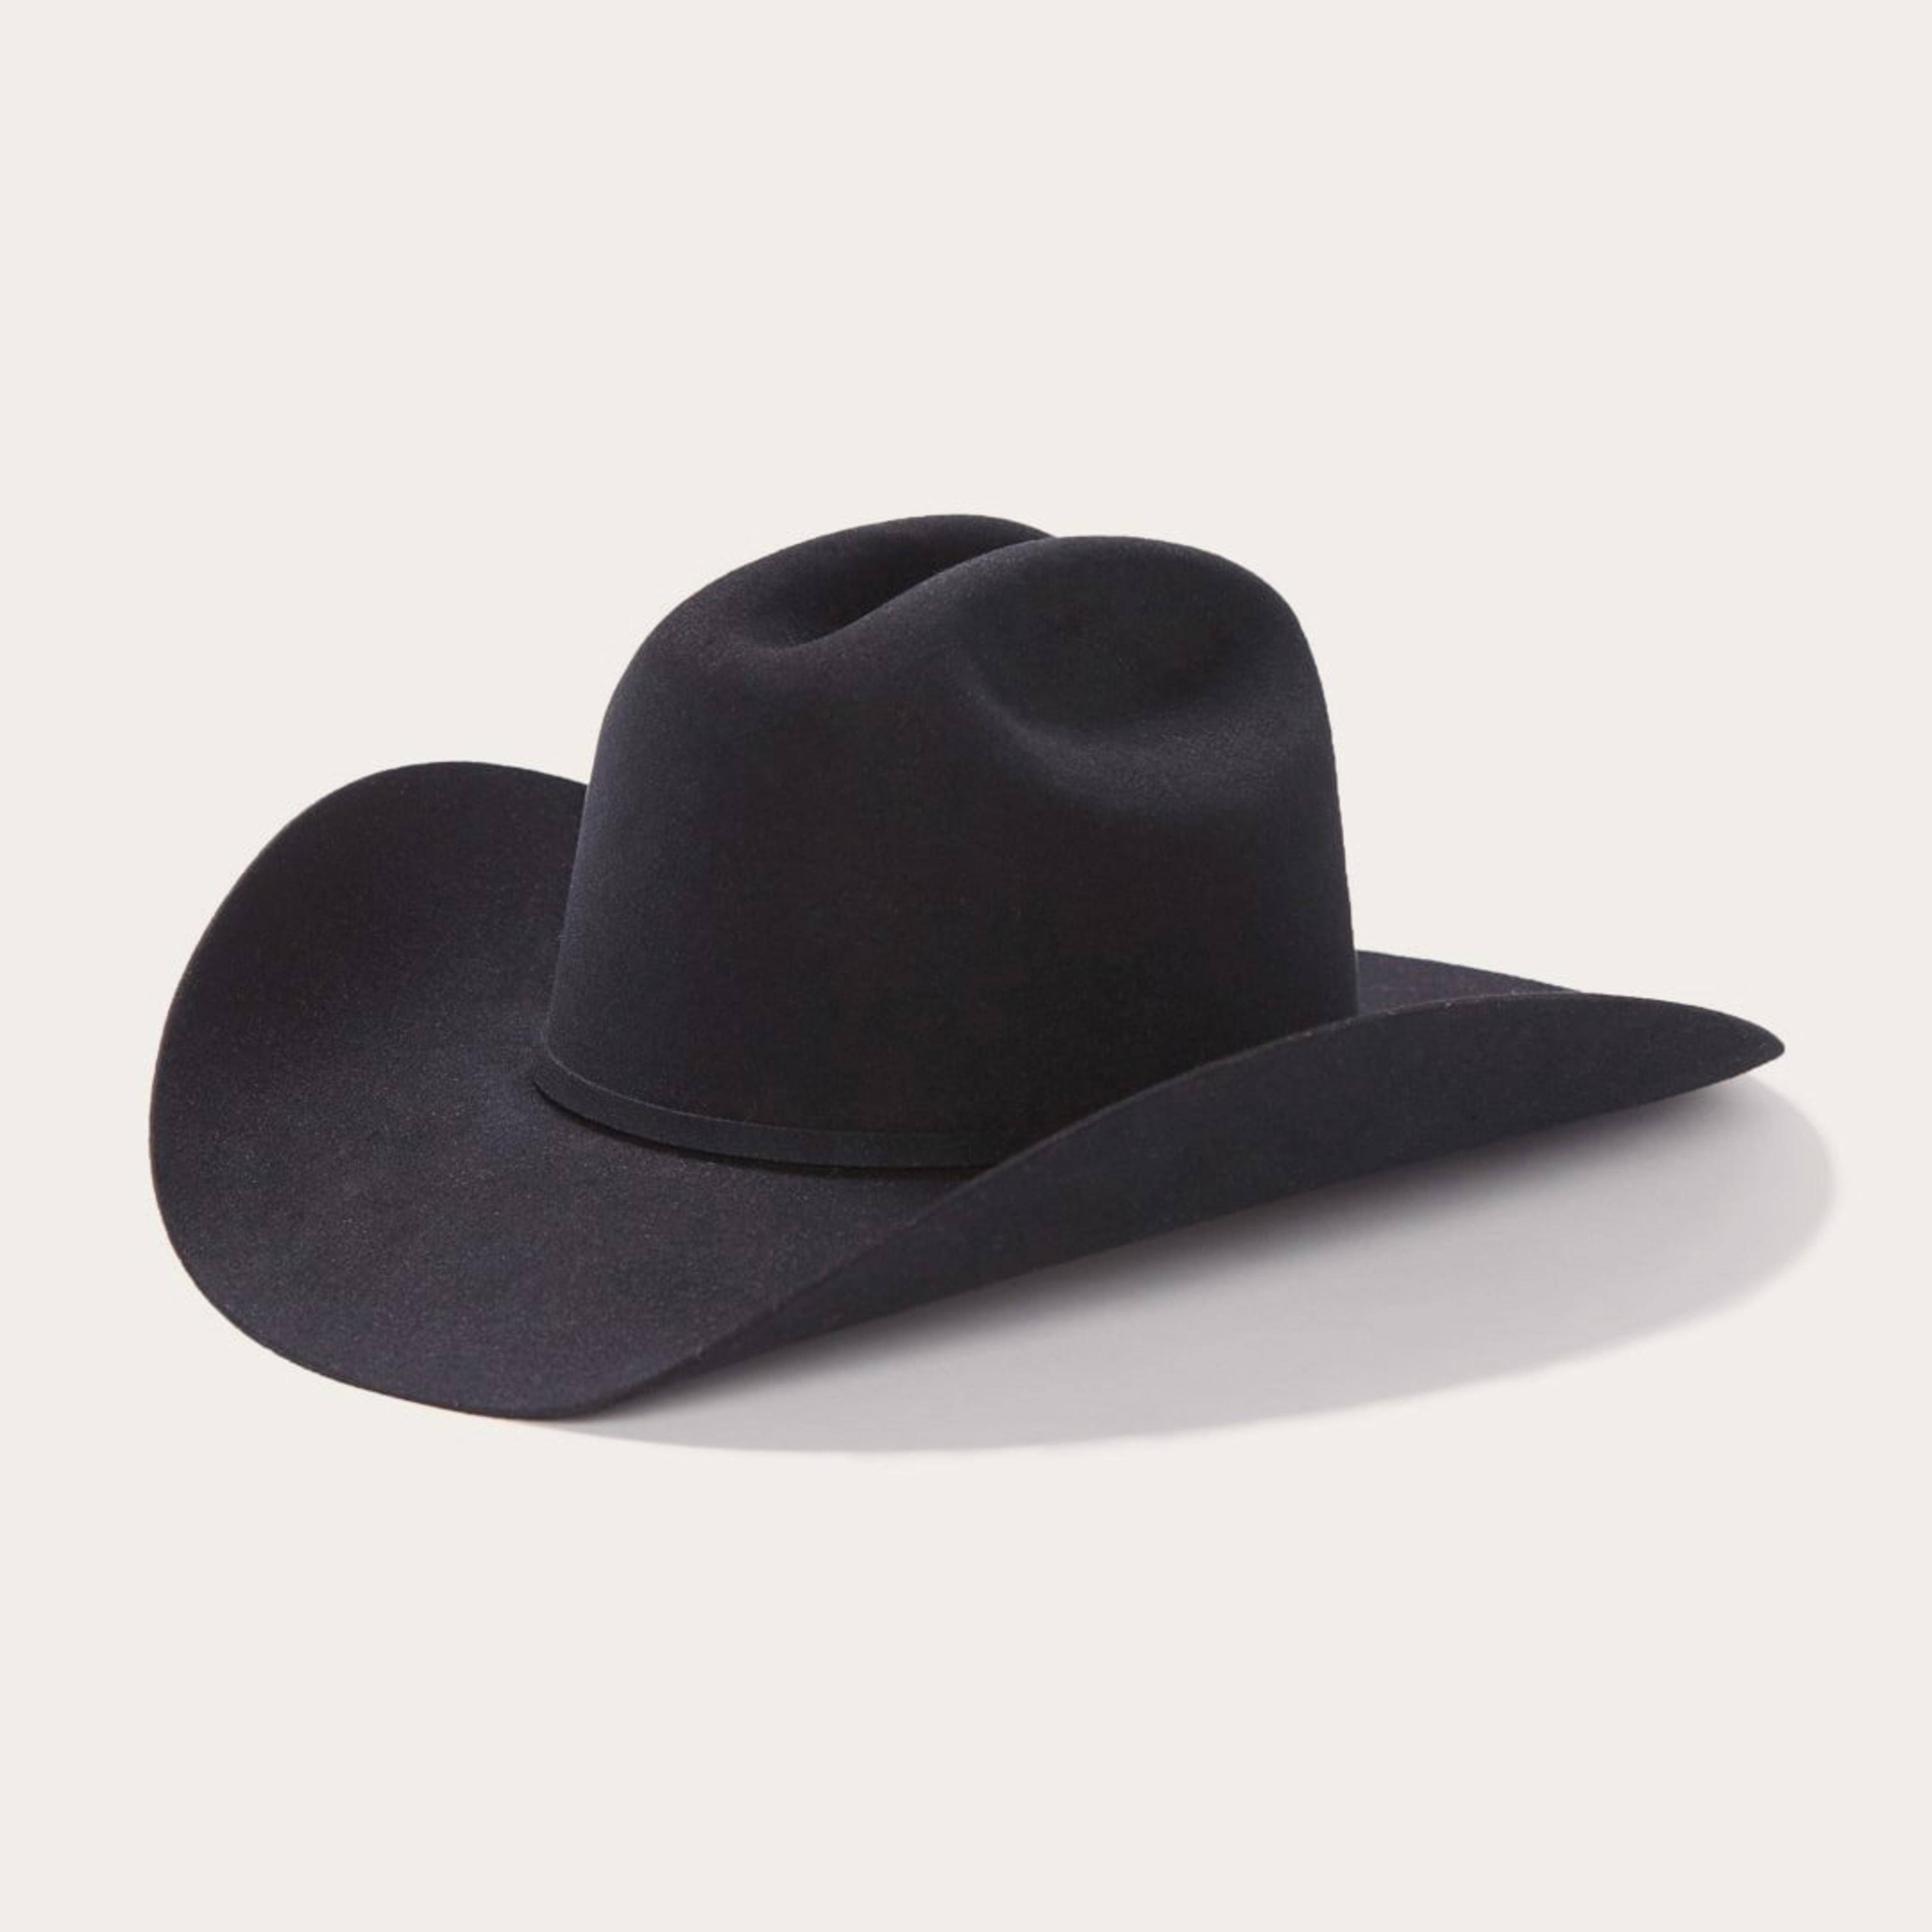 Stetson hats are made where A tour